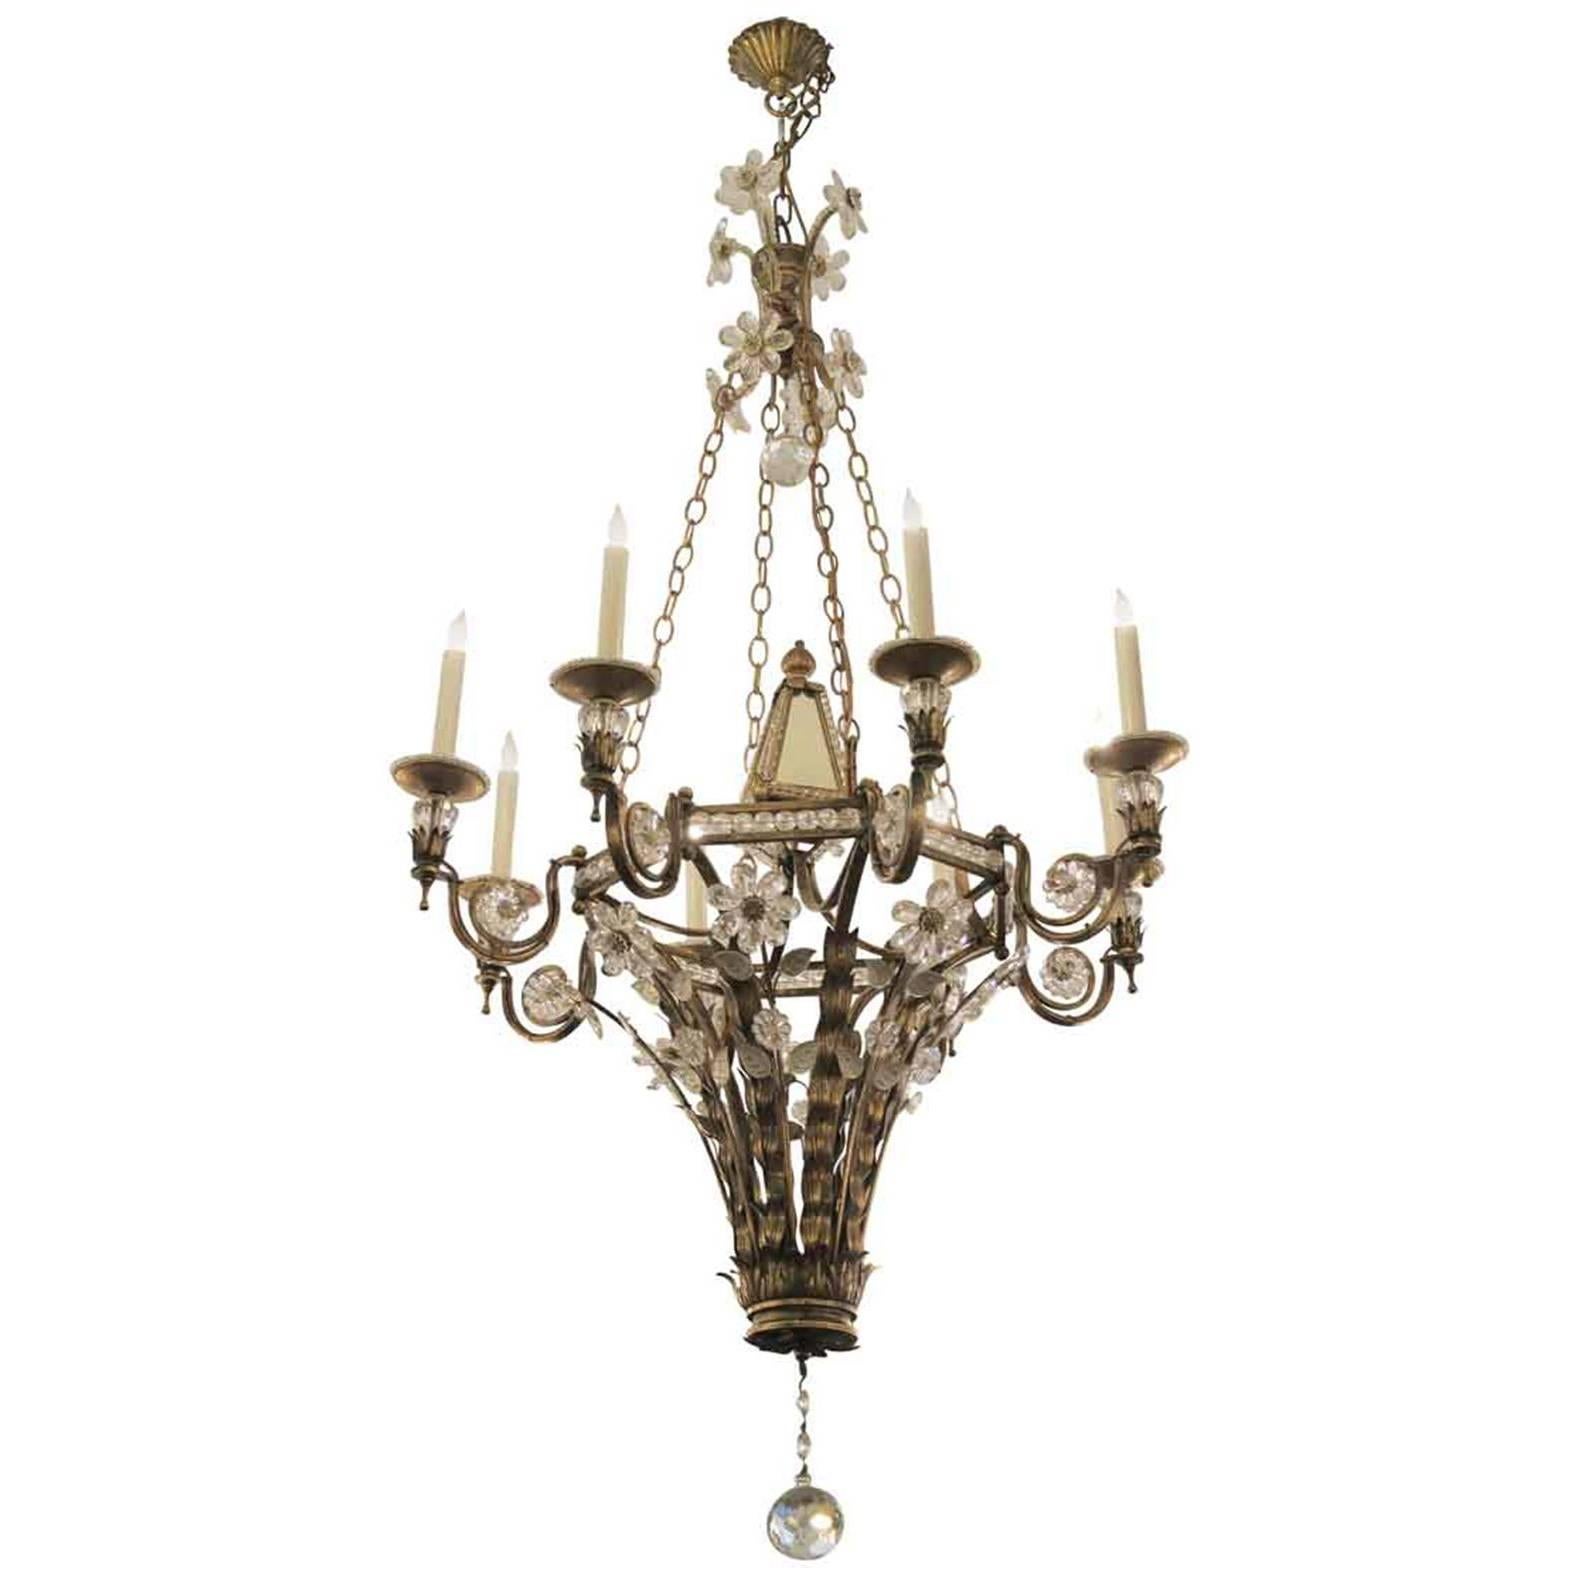 Wrought Iron and Crystal Floral Eight-Arm Mirrored Chandelier with Ball Finial